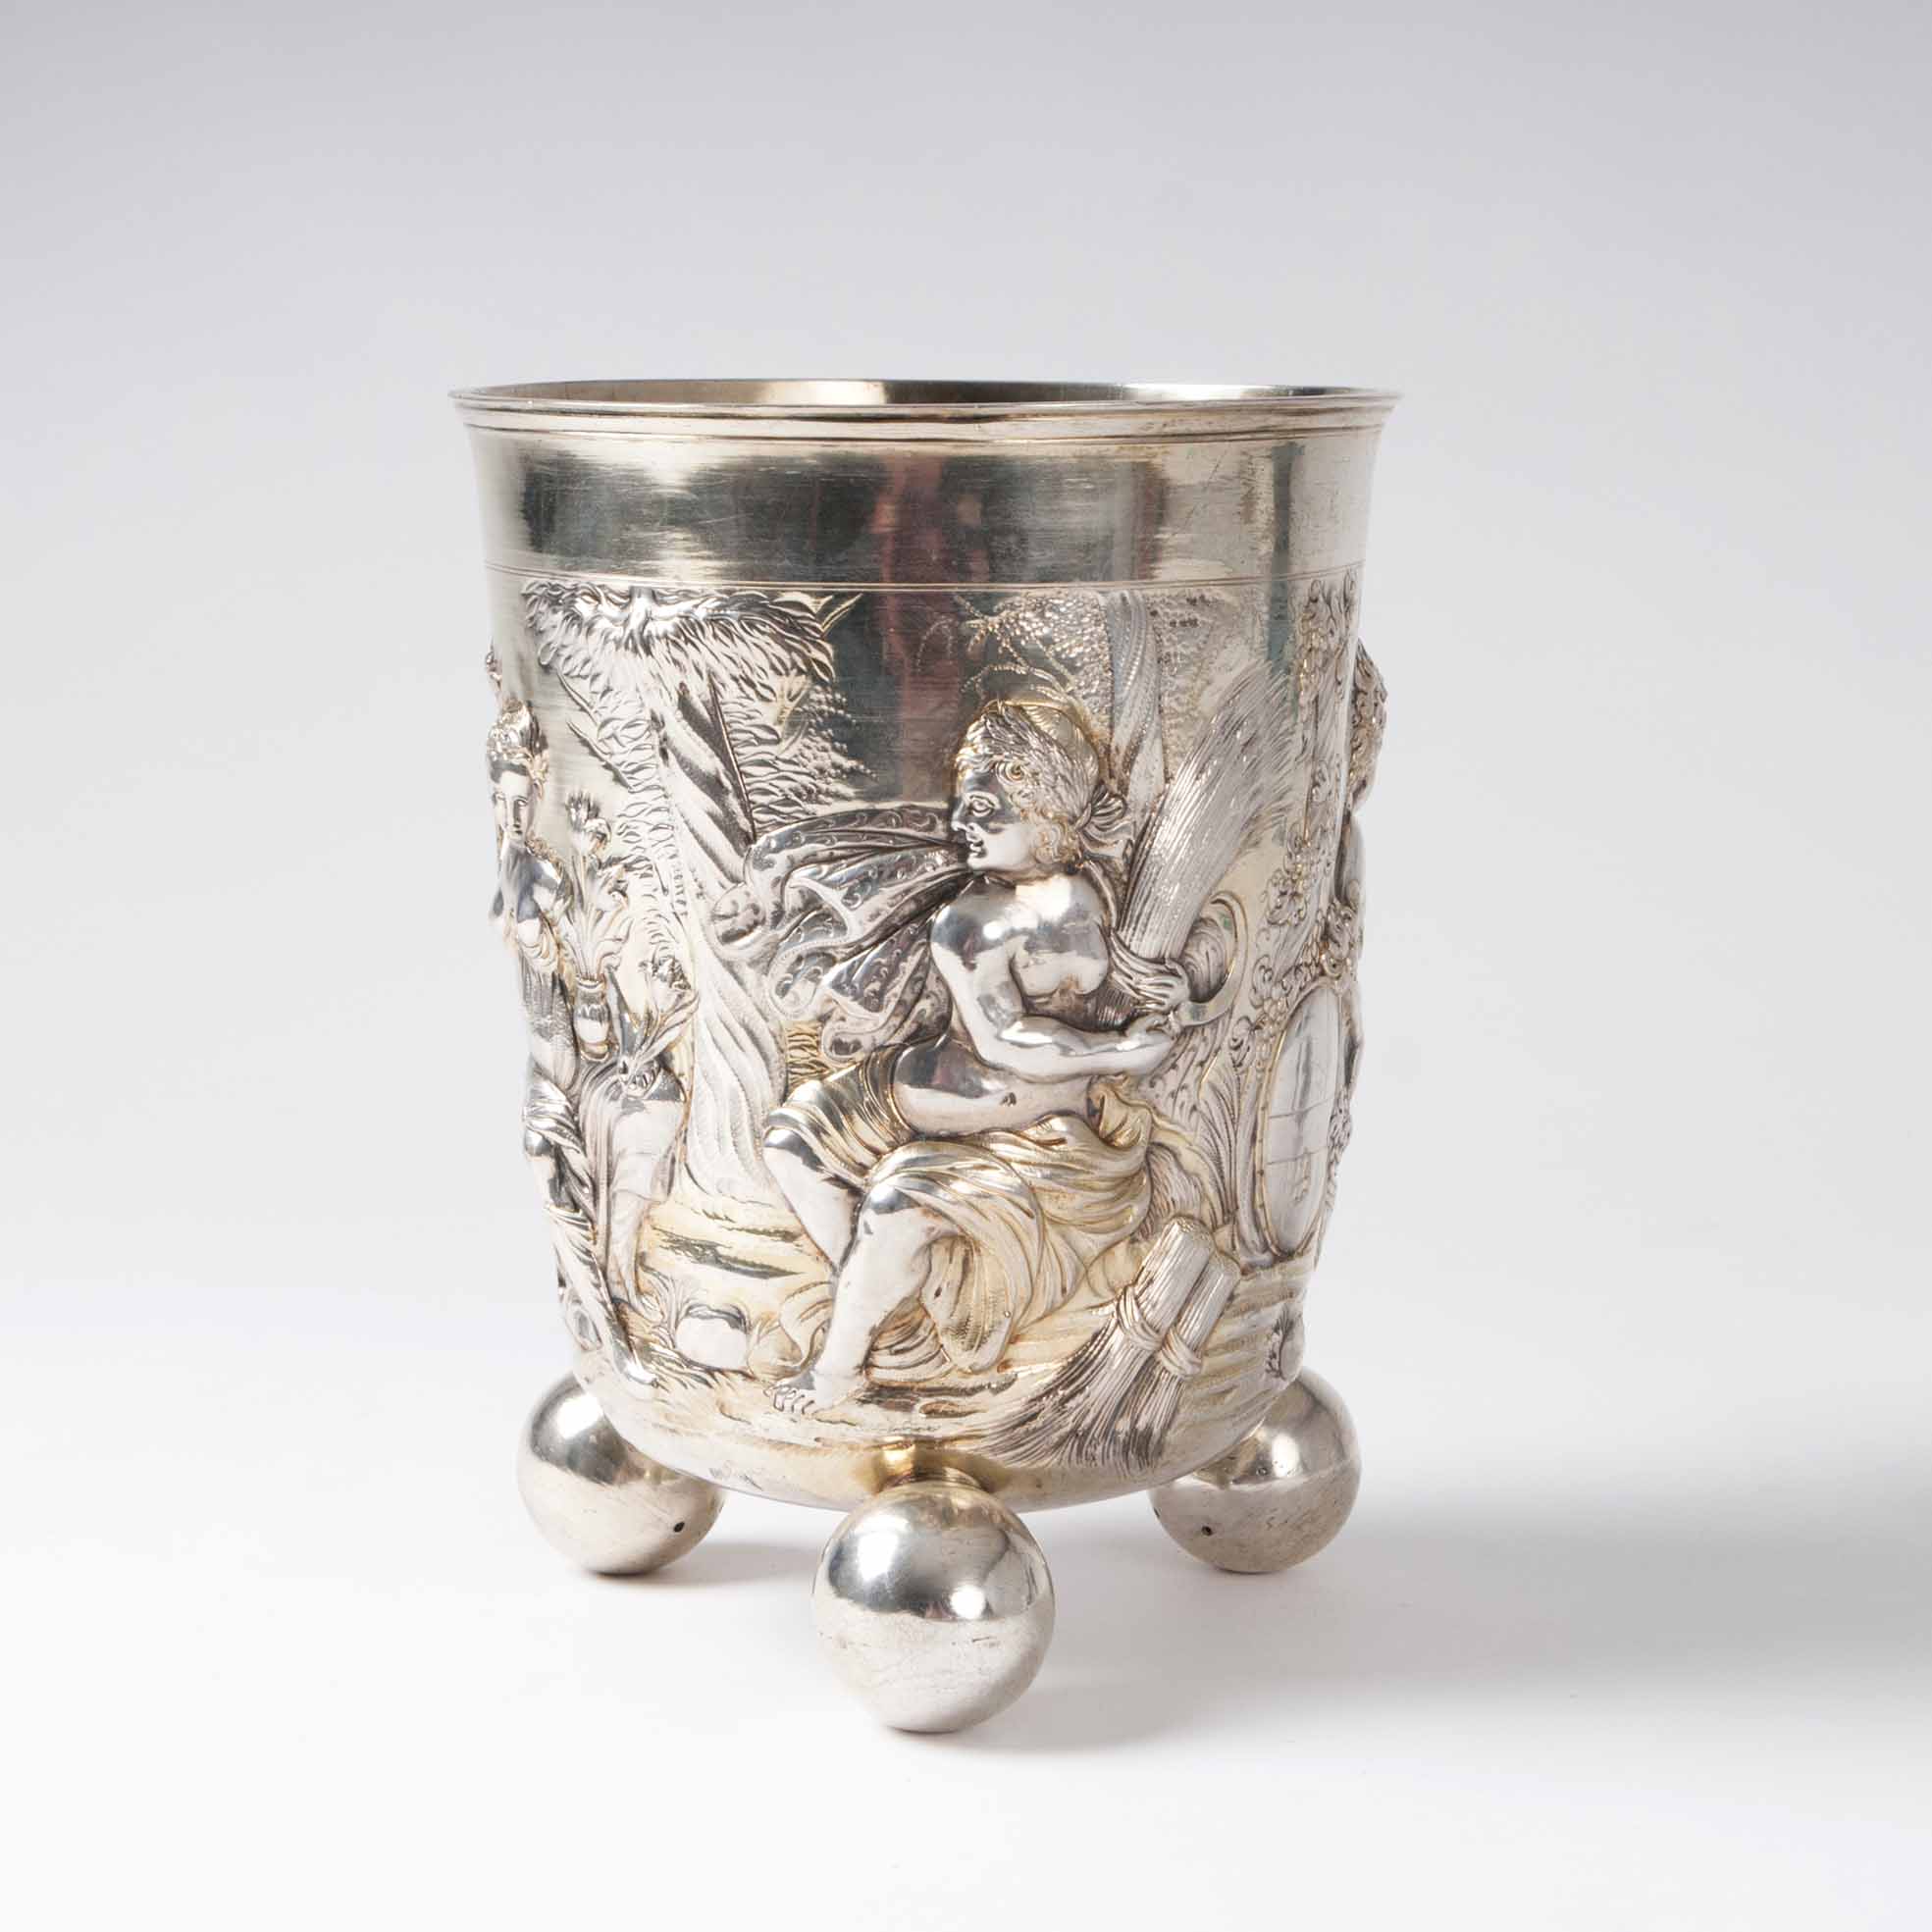 A museum-like grand beaker with chased allegory of the four seasons - image 3